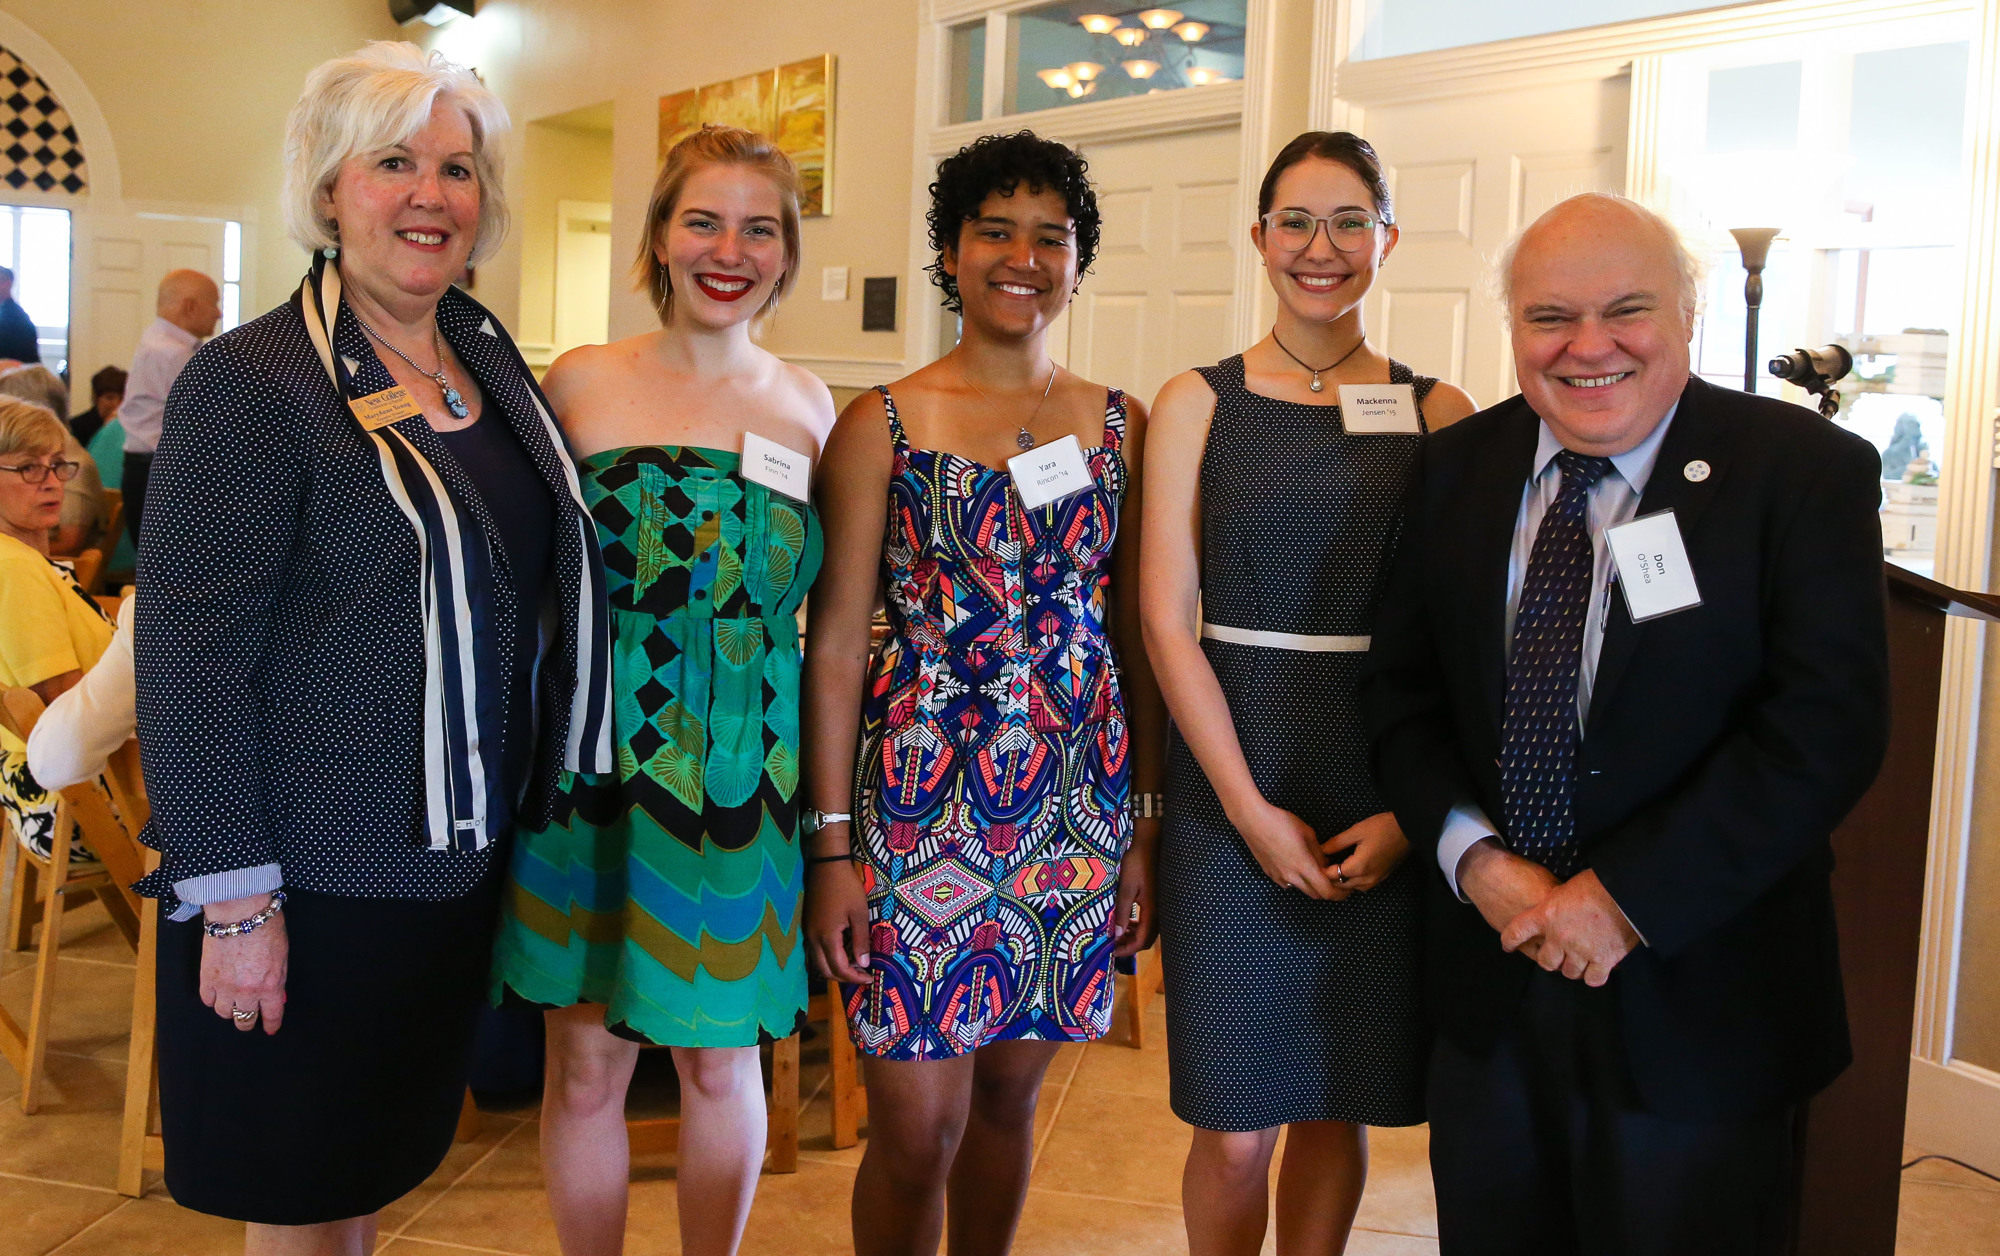 Mary Anne Young, executive director of the New College Foundation, with student speakers Sabrina Finn, Yara Rincon and Mackenna Jensen, and New College President Don O’Shea — Photo by Casey Brooke Lawson